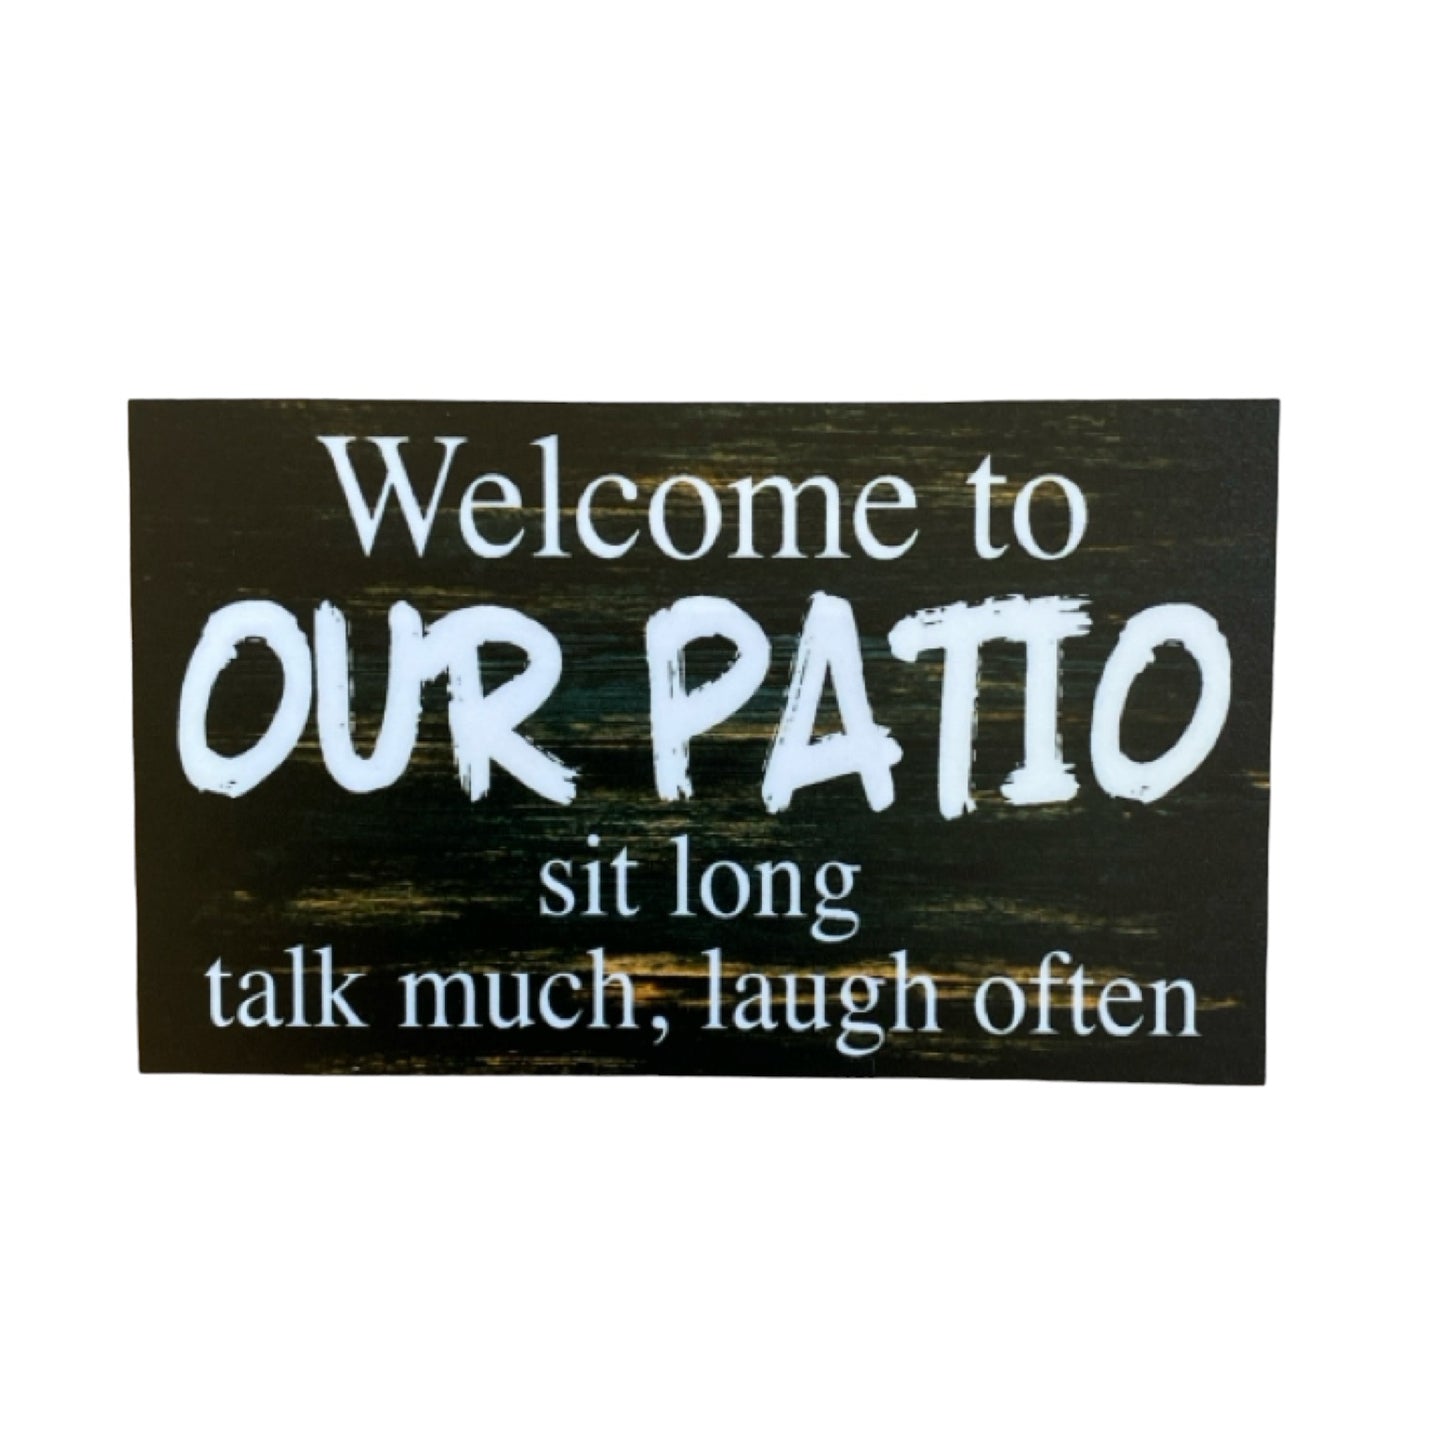 Welcome Patio Sit Long Talk Laugh Vintage Sign - The Renmy Store Homewares & Gifts 